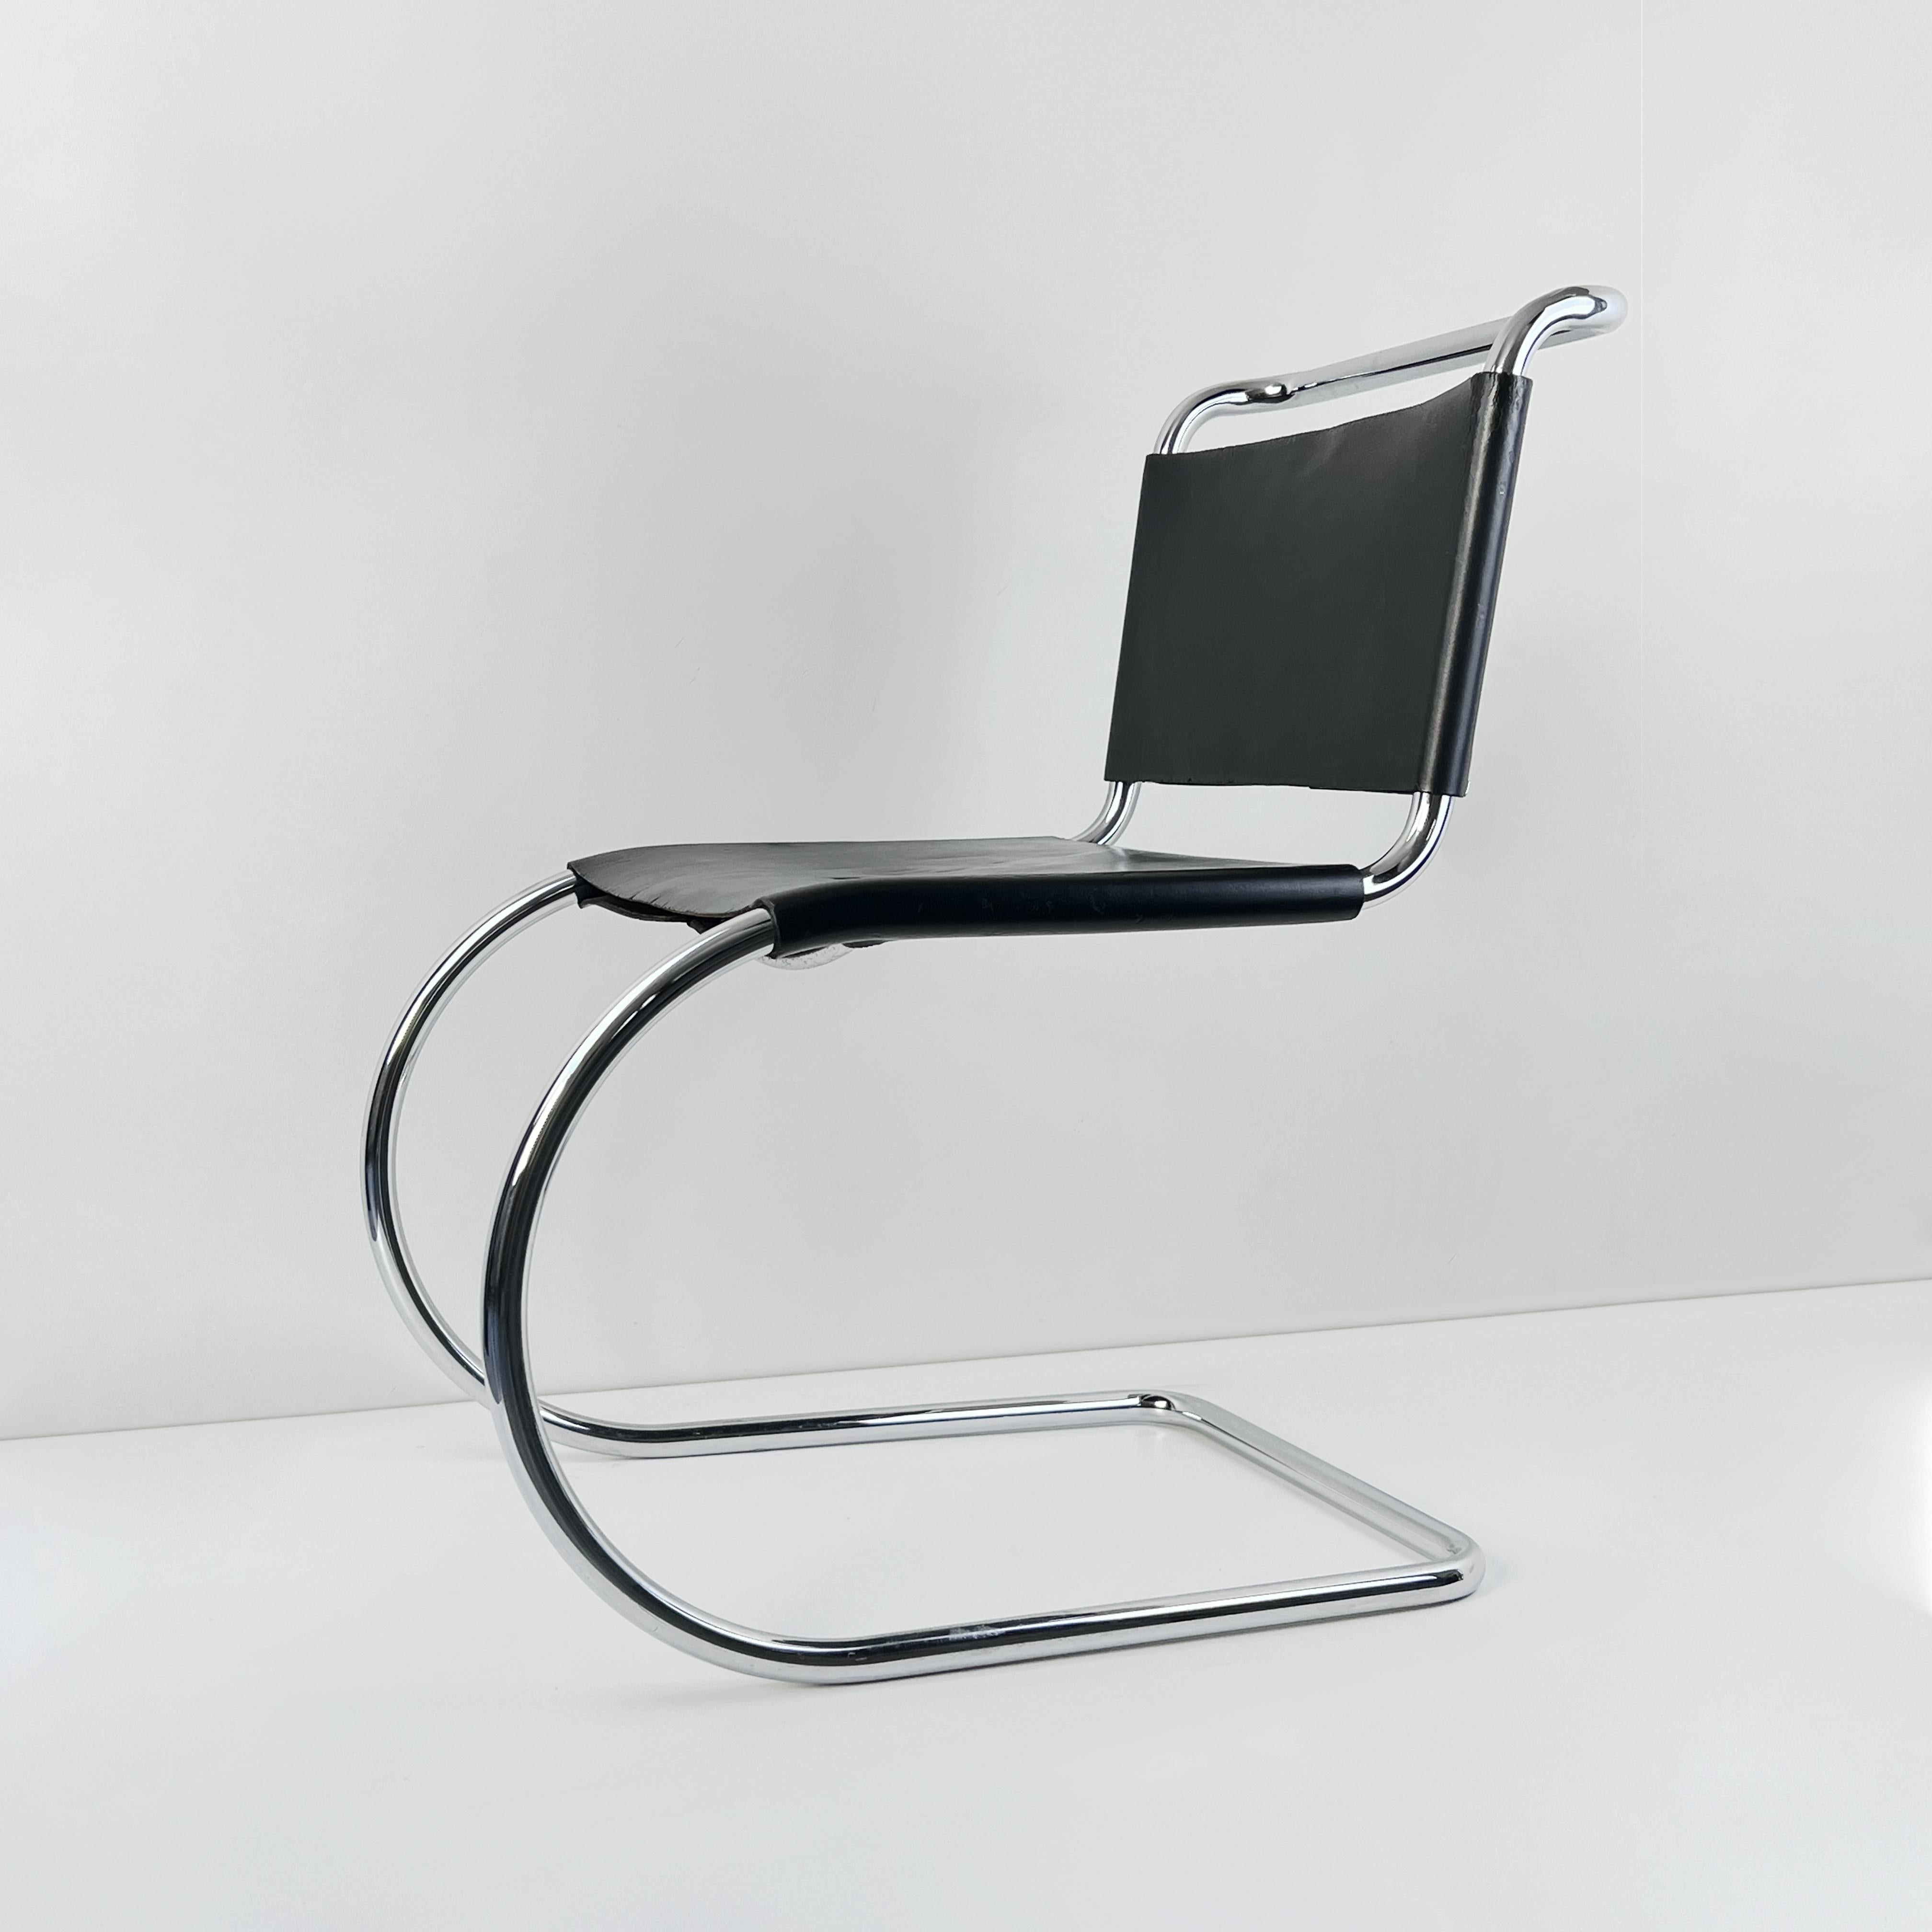 The MR10 chairs produced for Knoll represent an original furniture design conceptualized by Mies van der Rohe. These vintage chairs are iconic, with frames that draw inspiration from Marcel Breuer, a fellow Bauhaus designer. Crafted with thick